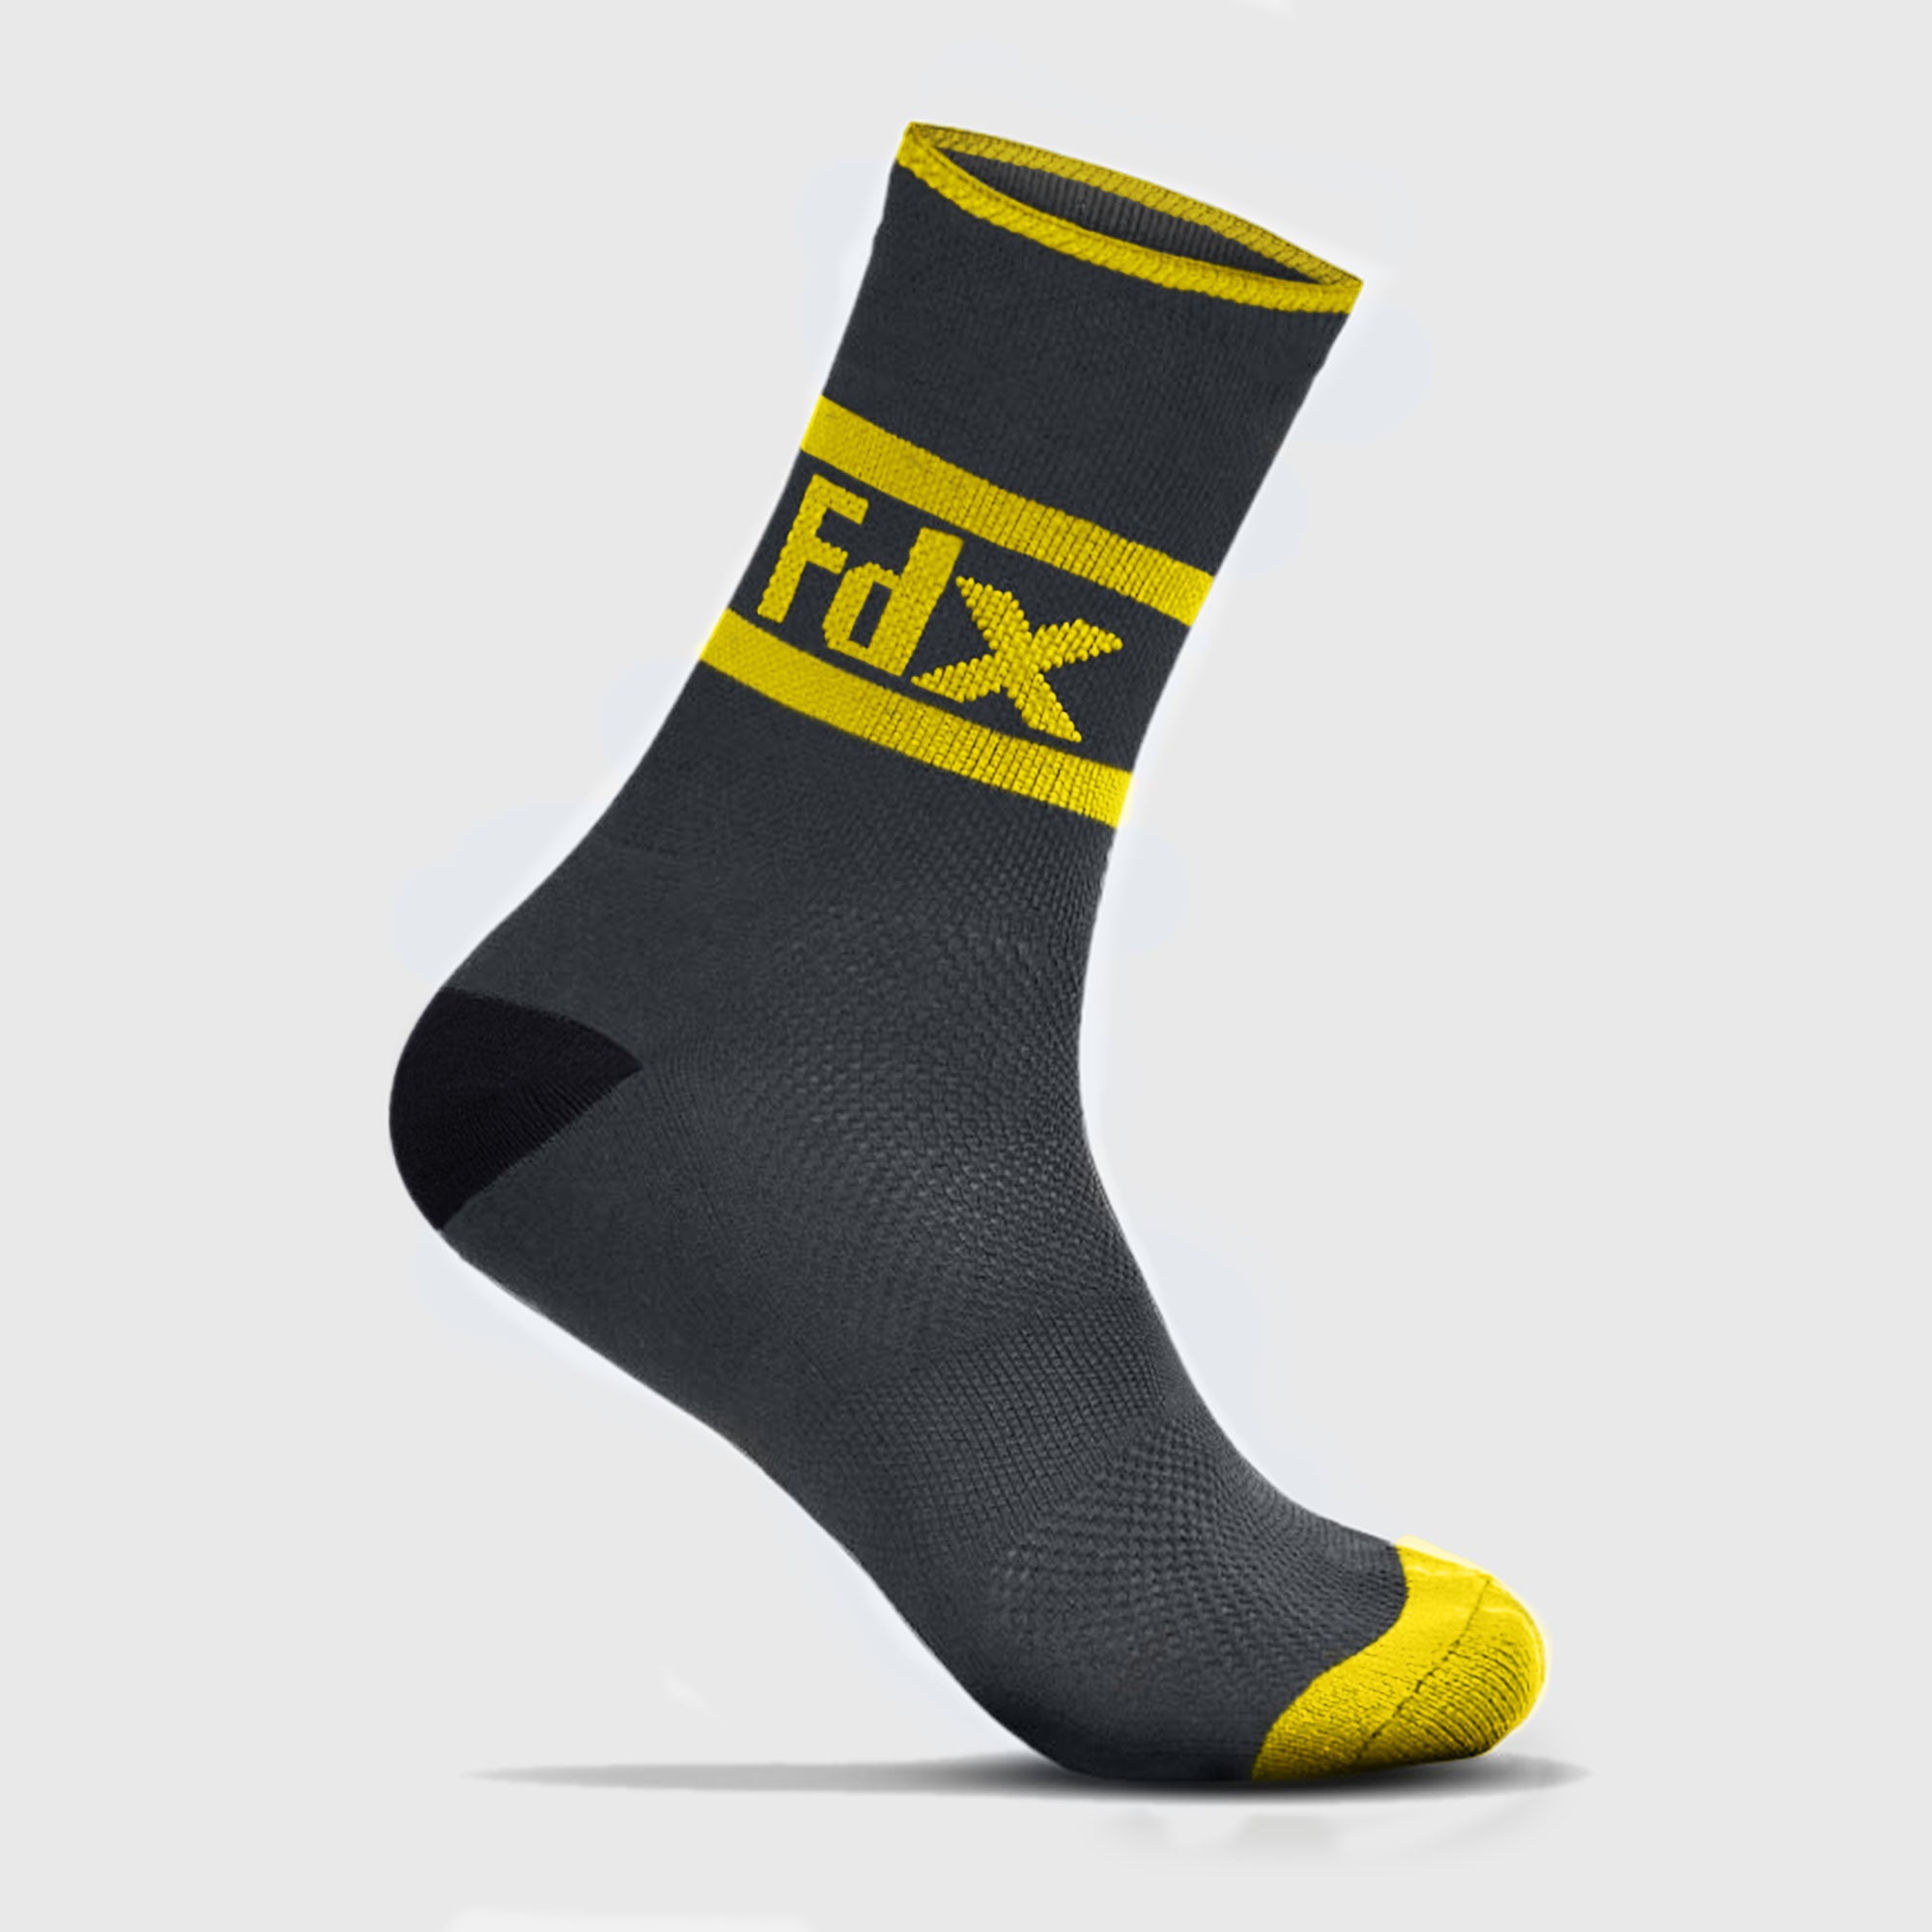 Fdx Grey Compression Socks for Cycling & Running